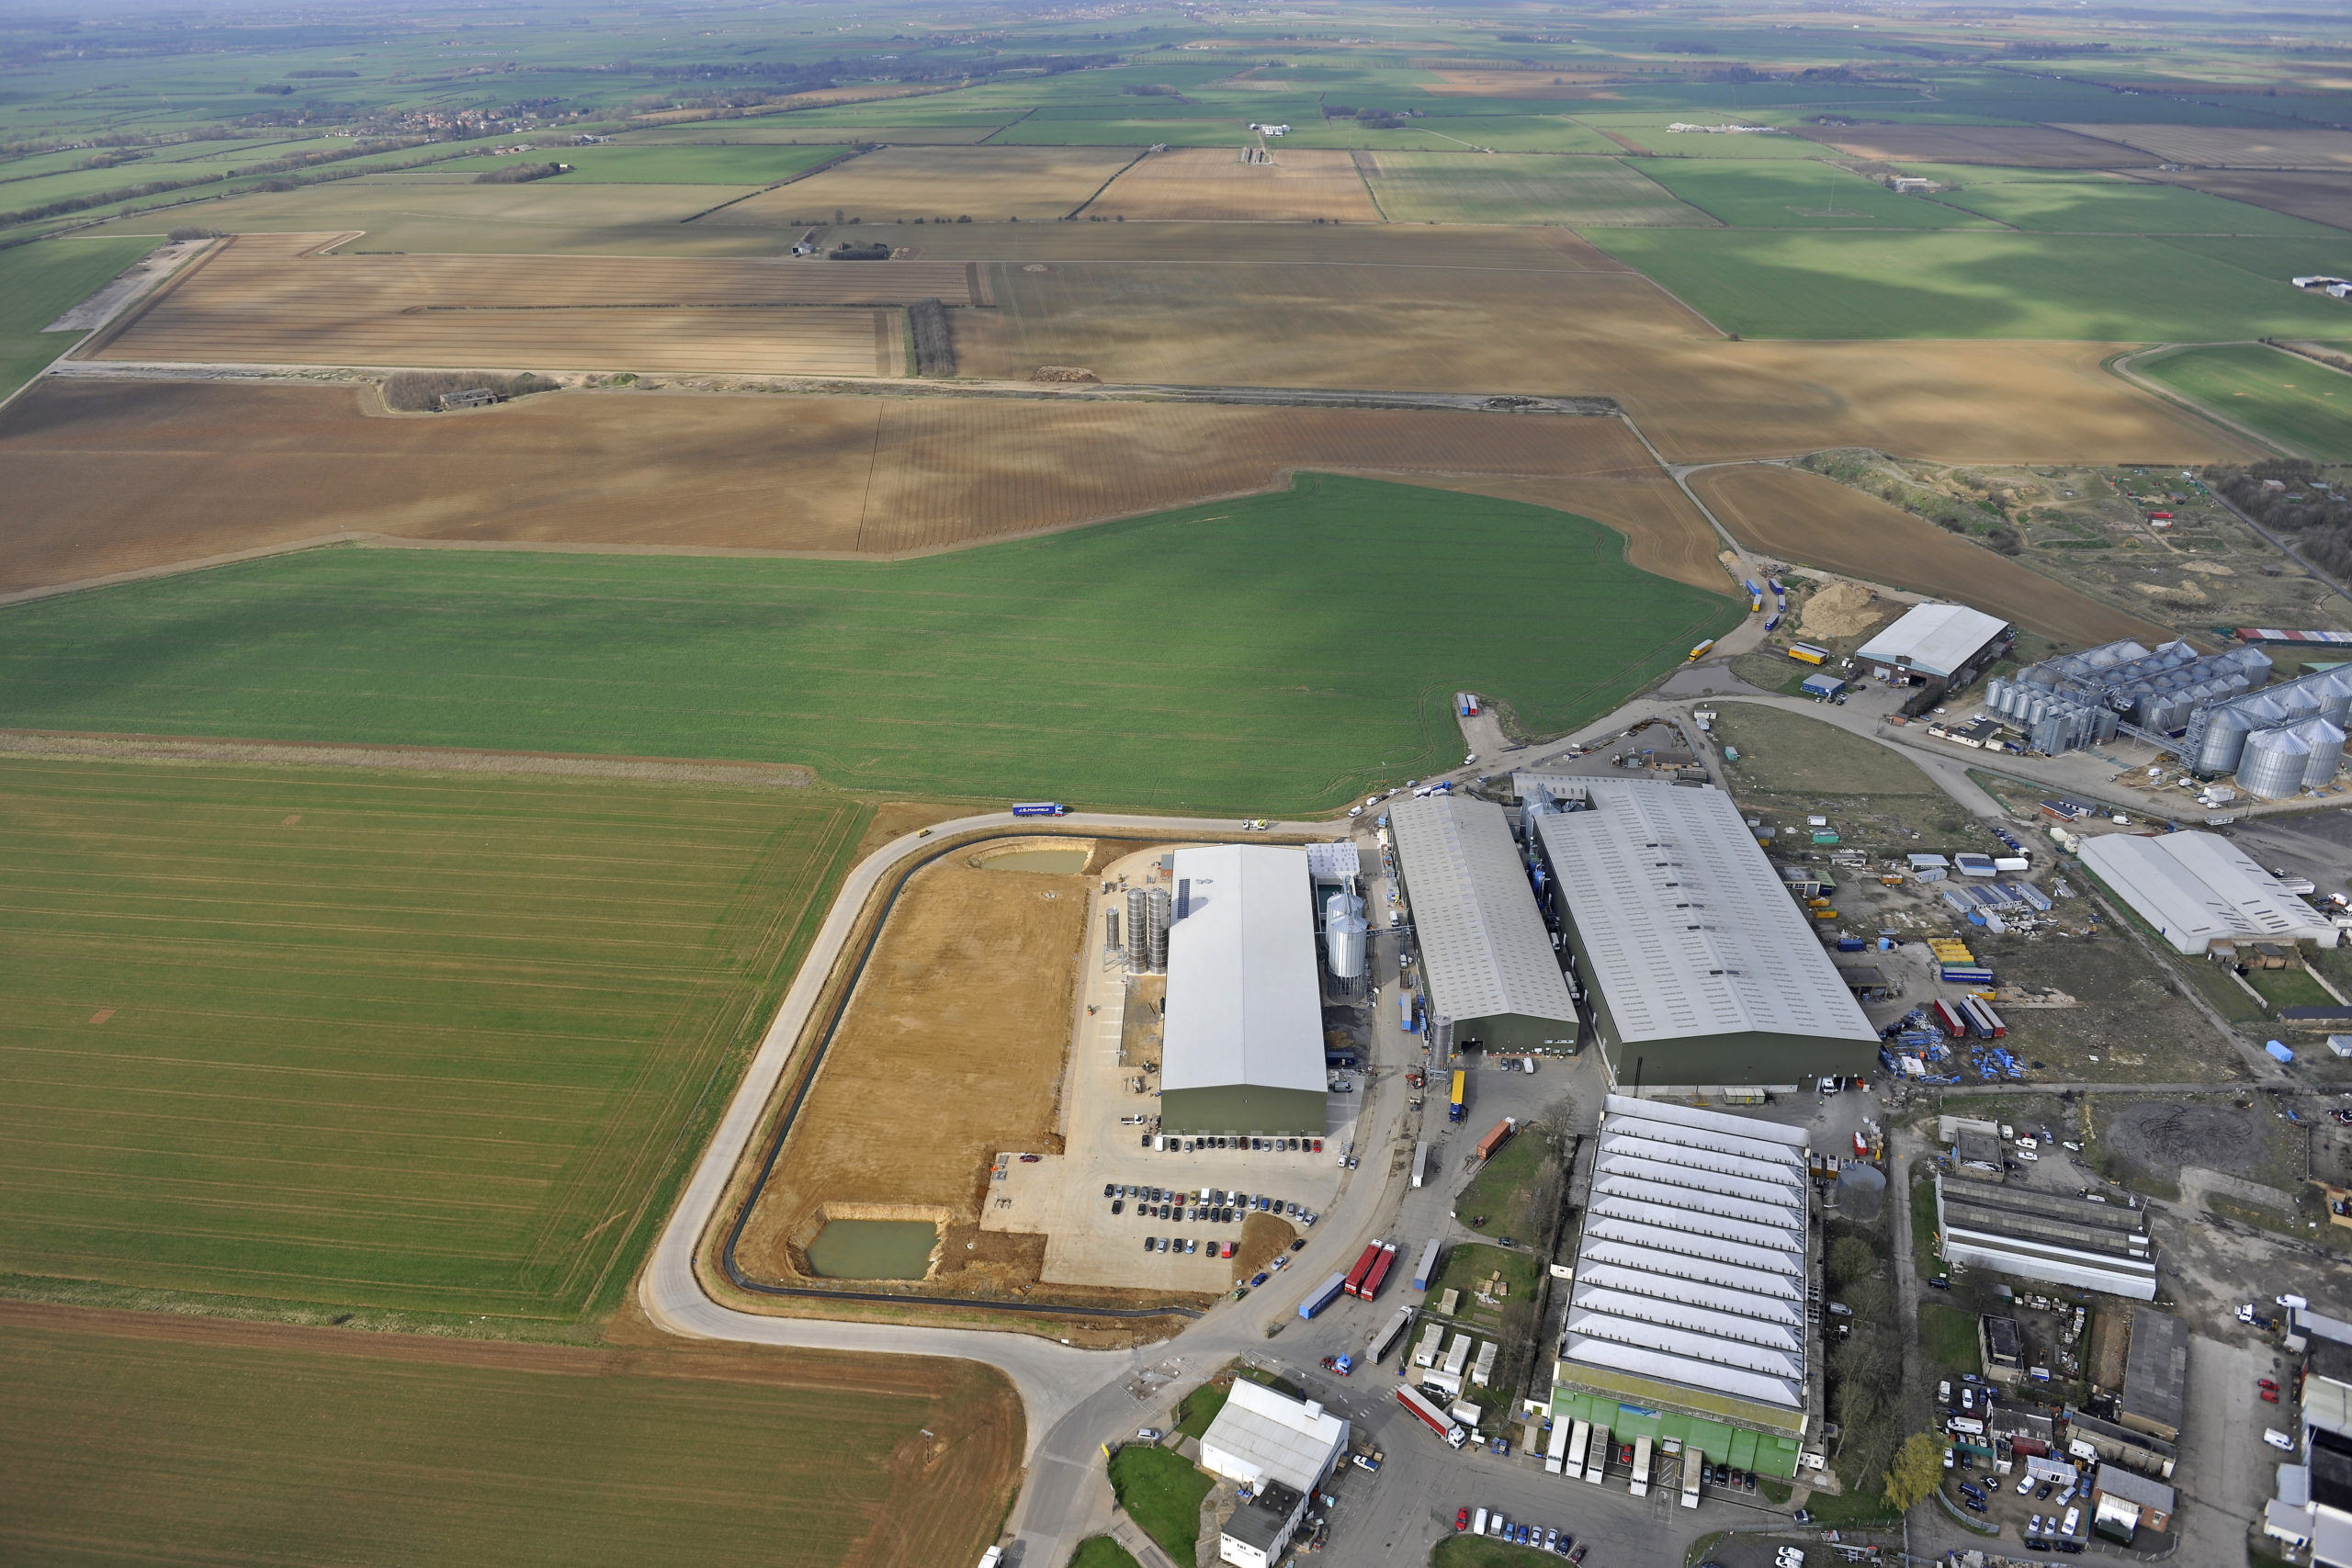 The £15 million rPET bottle recycling facility in Hemswell, Lincolnshire